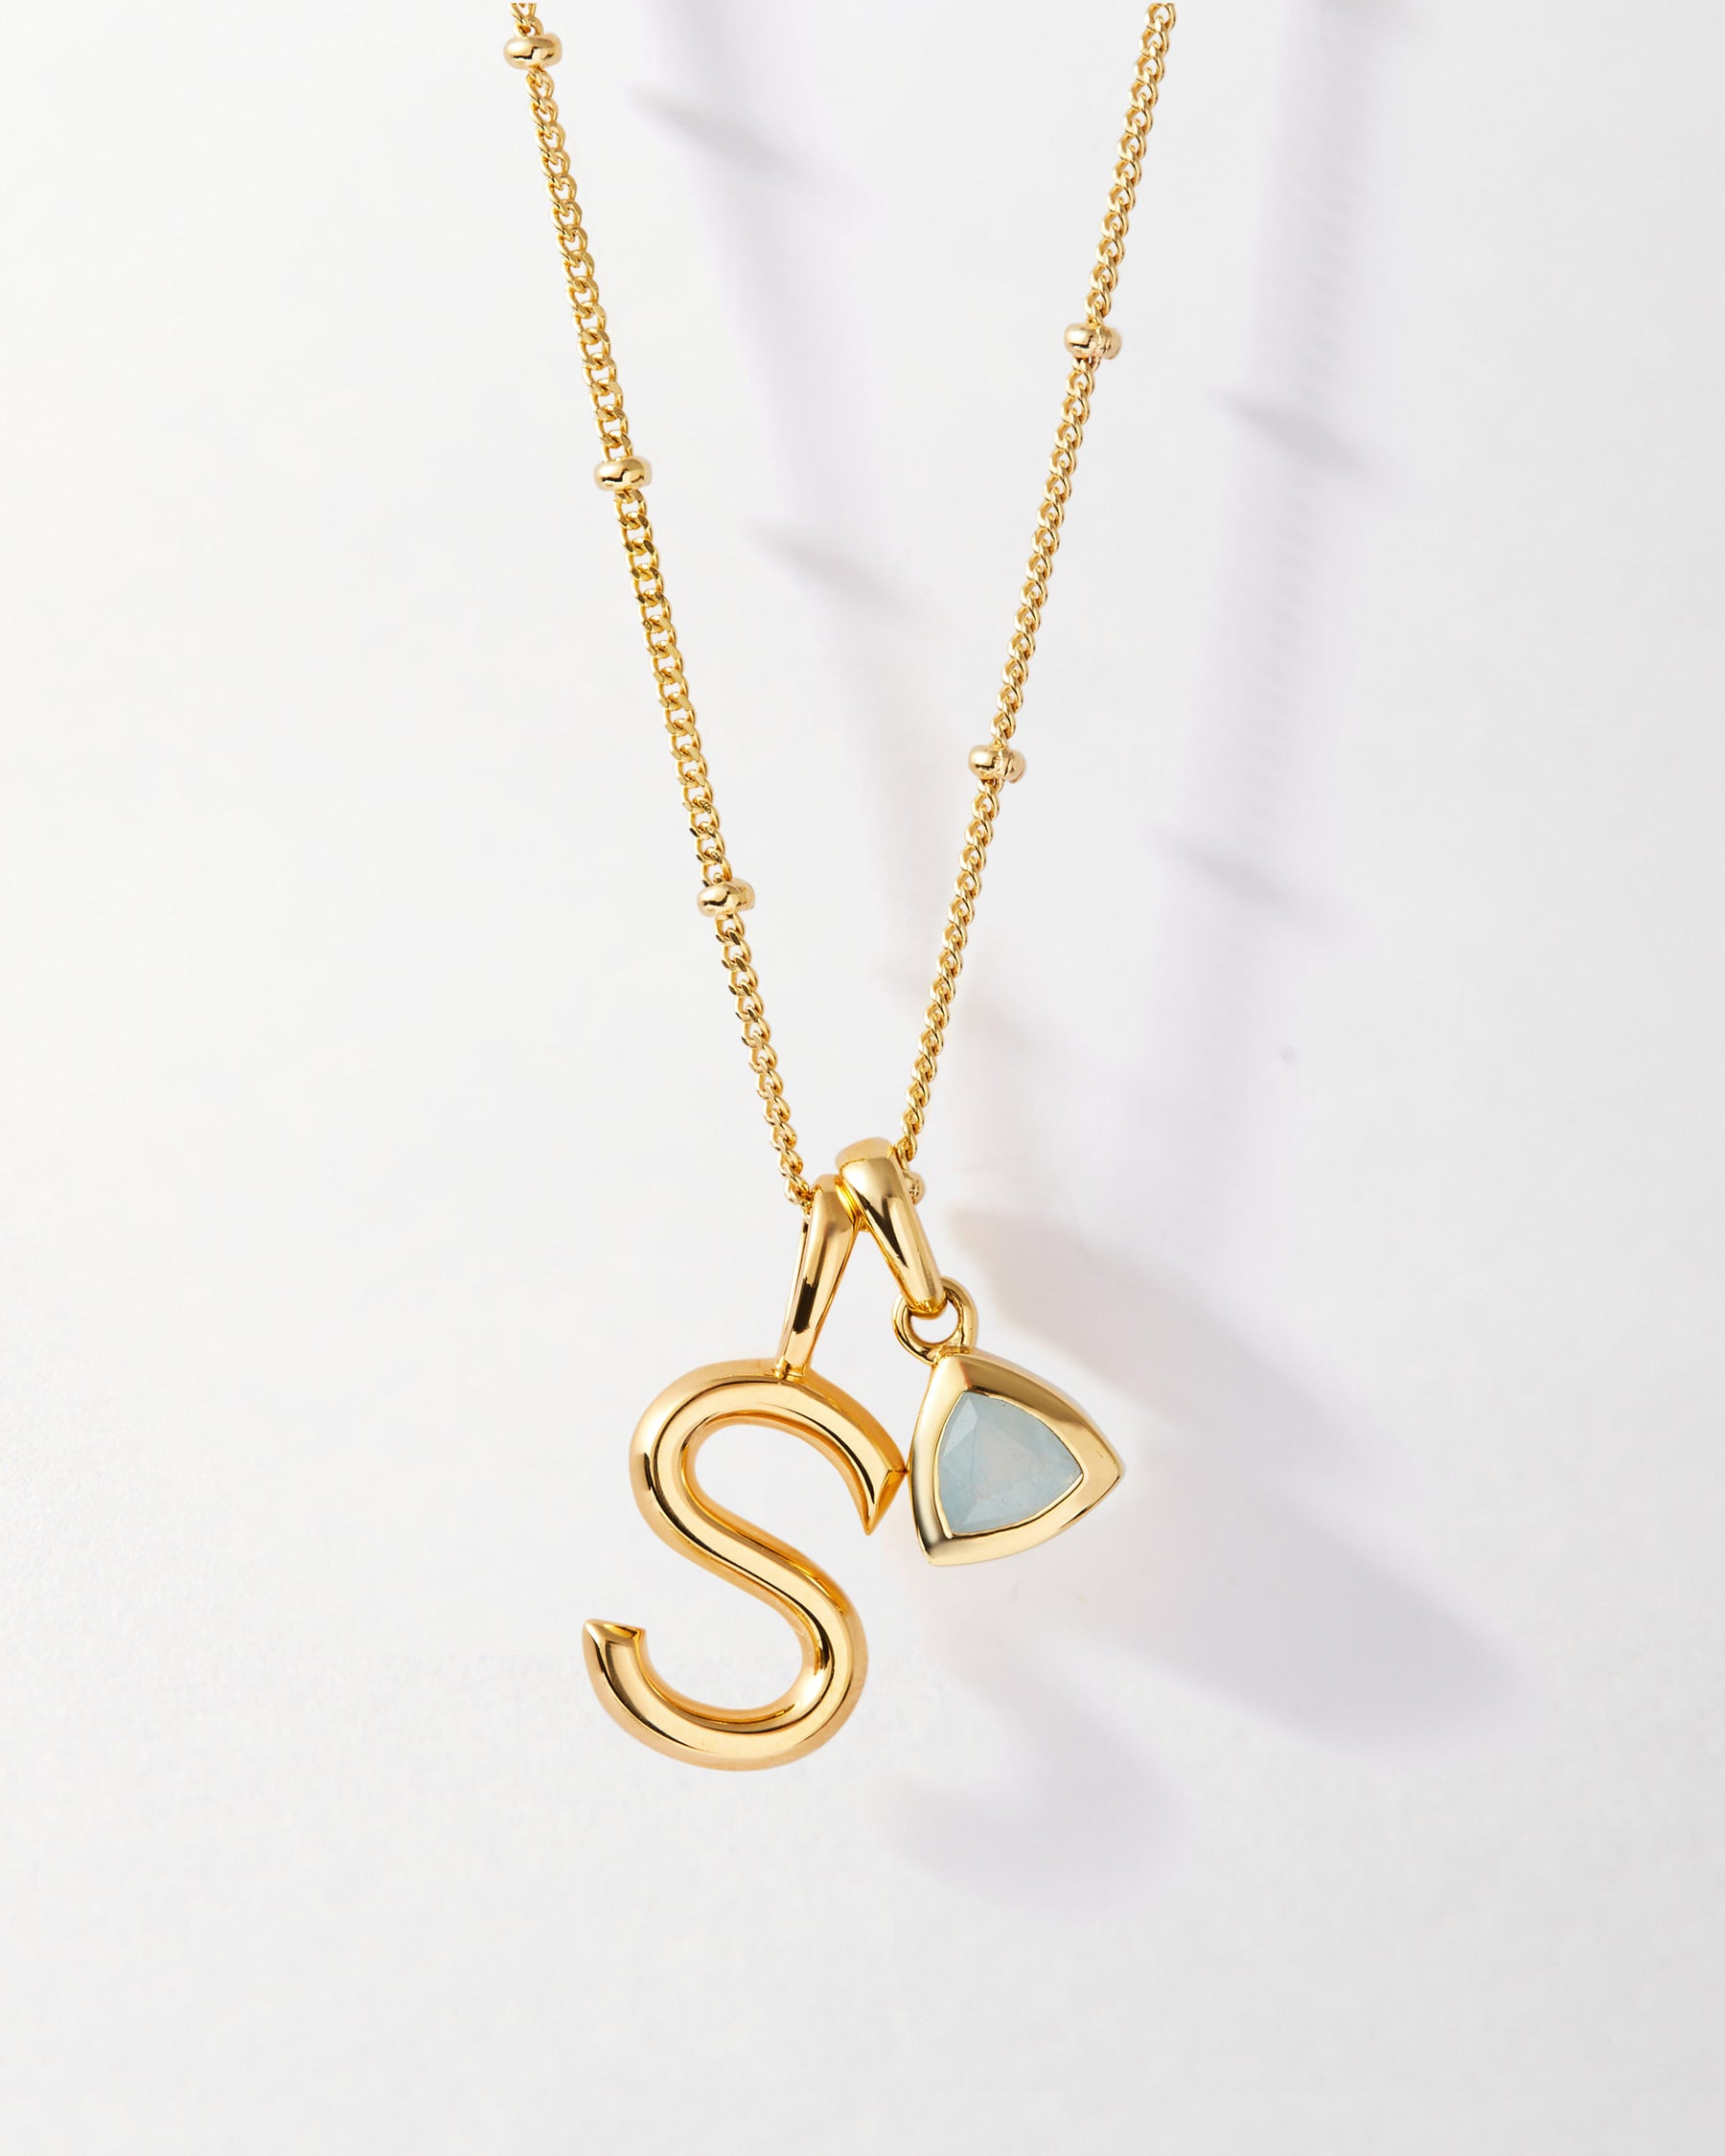 Royal Chain 14K Gold Large Initial S Necklace RCS10908-18 | Lester Martin |  Dresher, PA